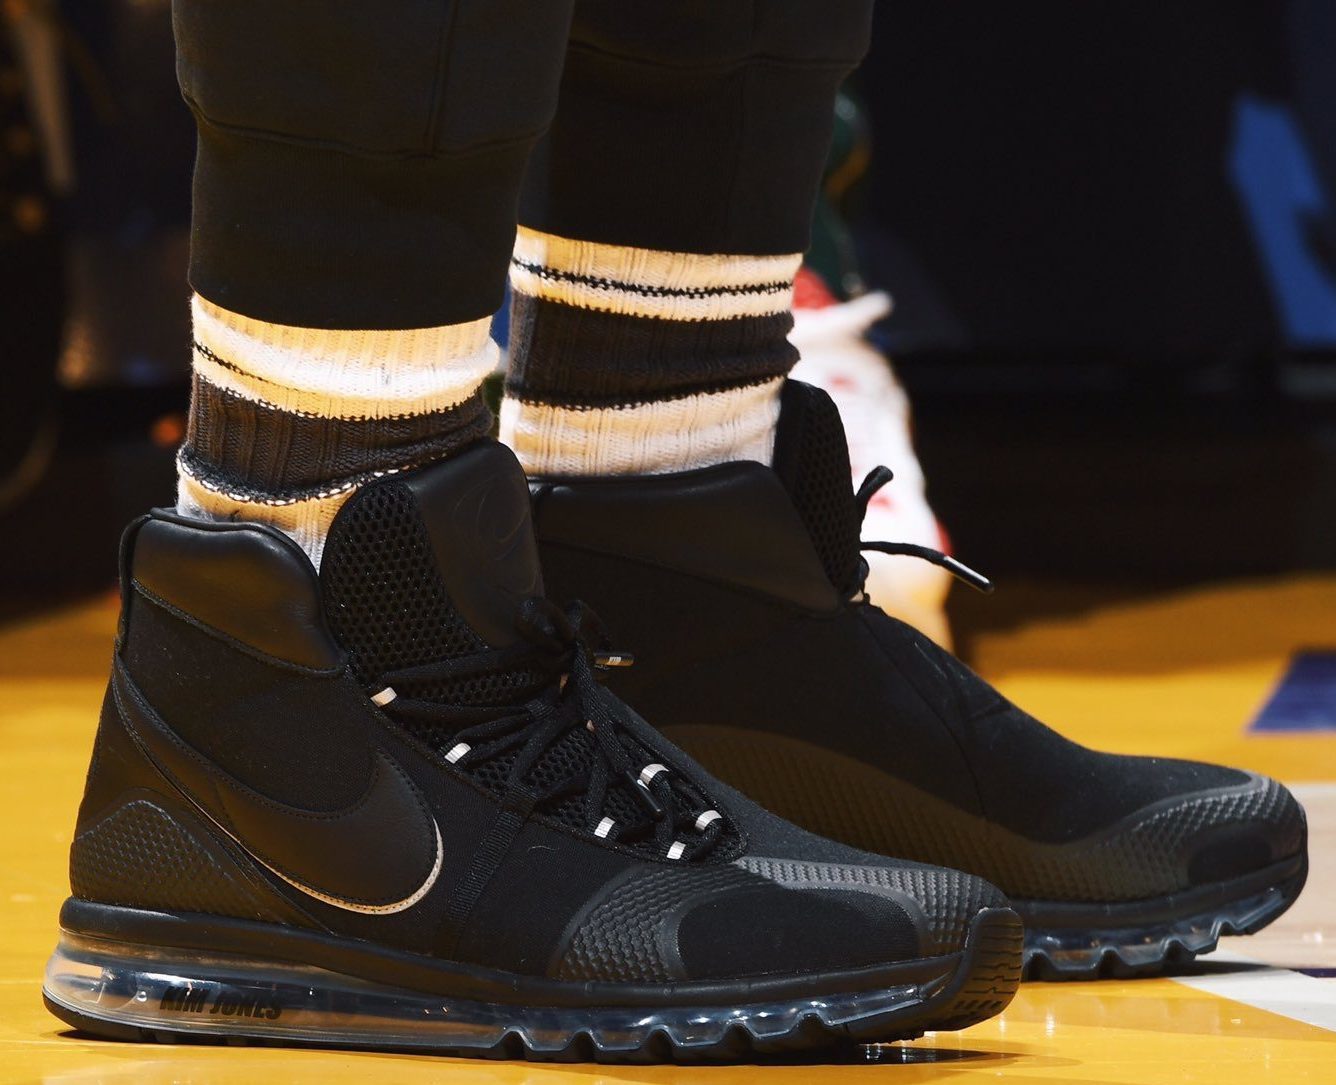 lebron james shoes last night game